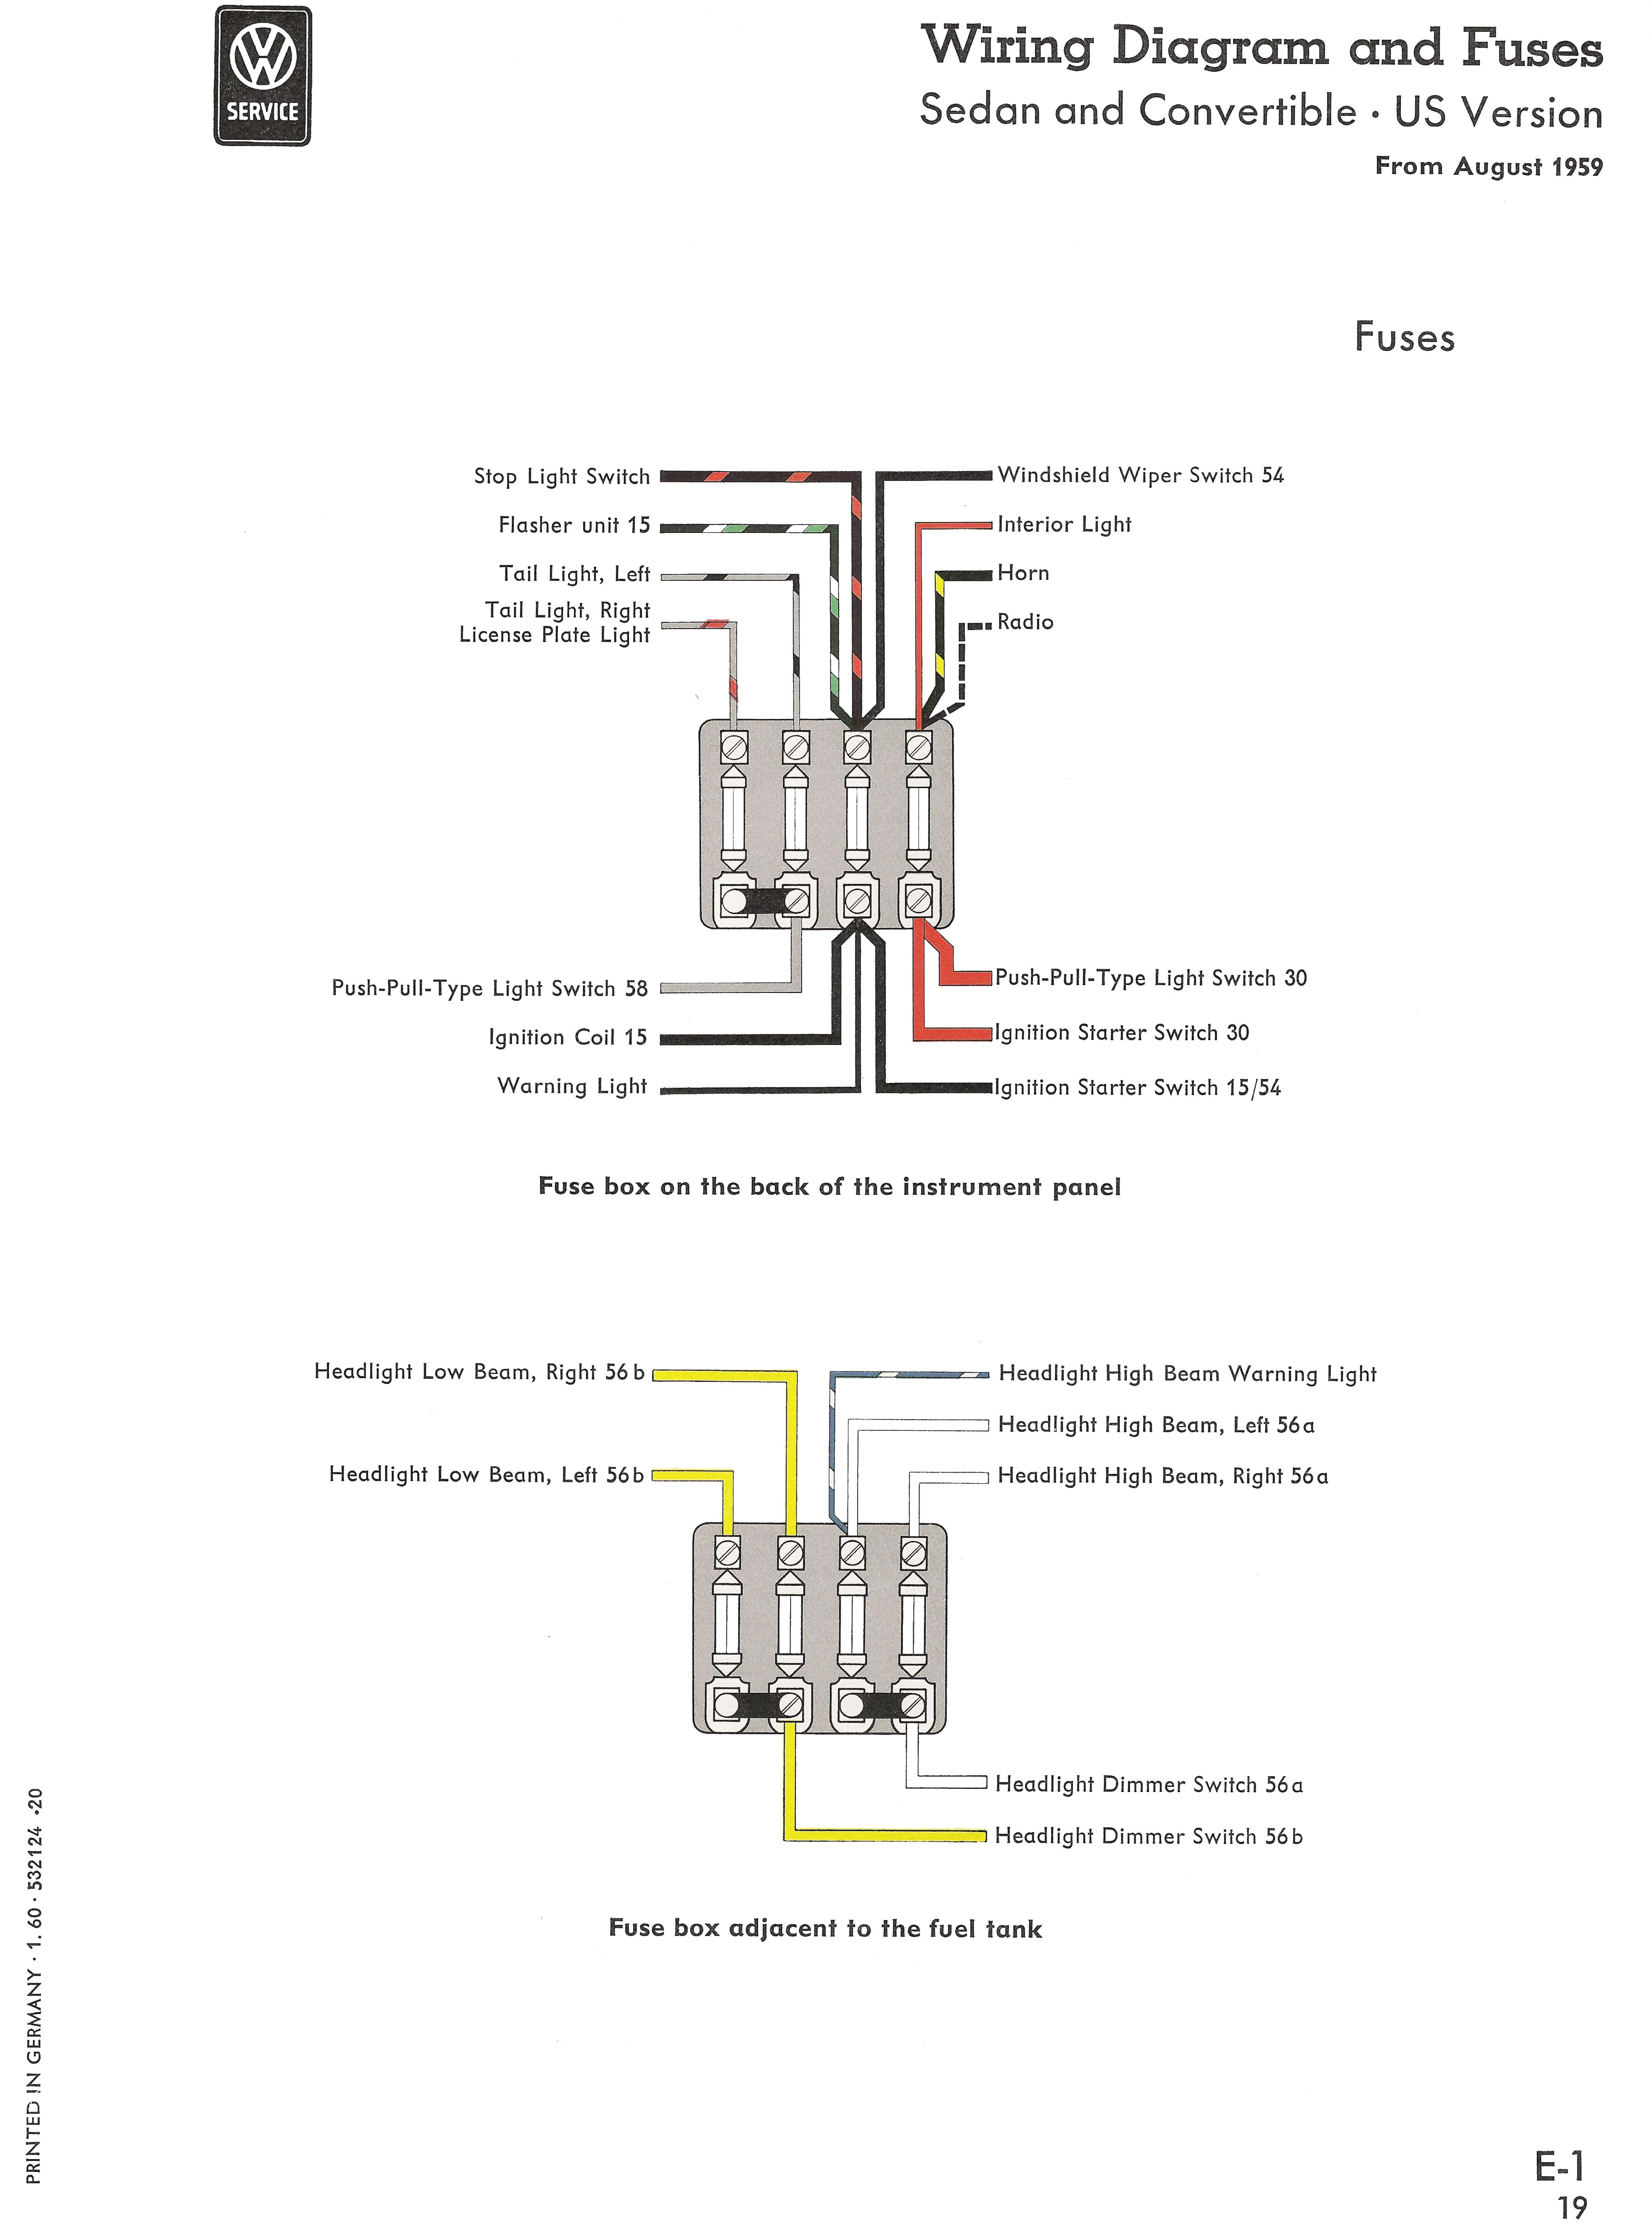 Mini Fuse Box Wiring - Wiring Diagrams Hubs - Electrical Outlet Wiring Diagram